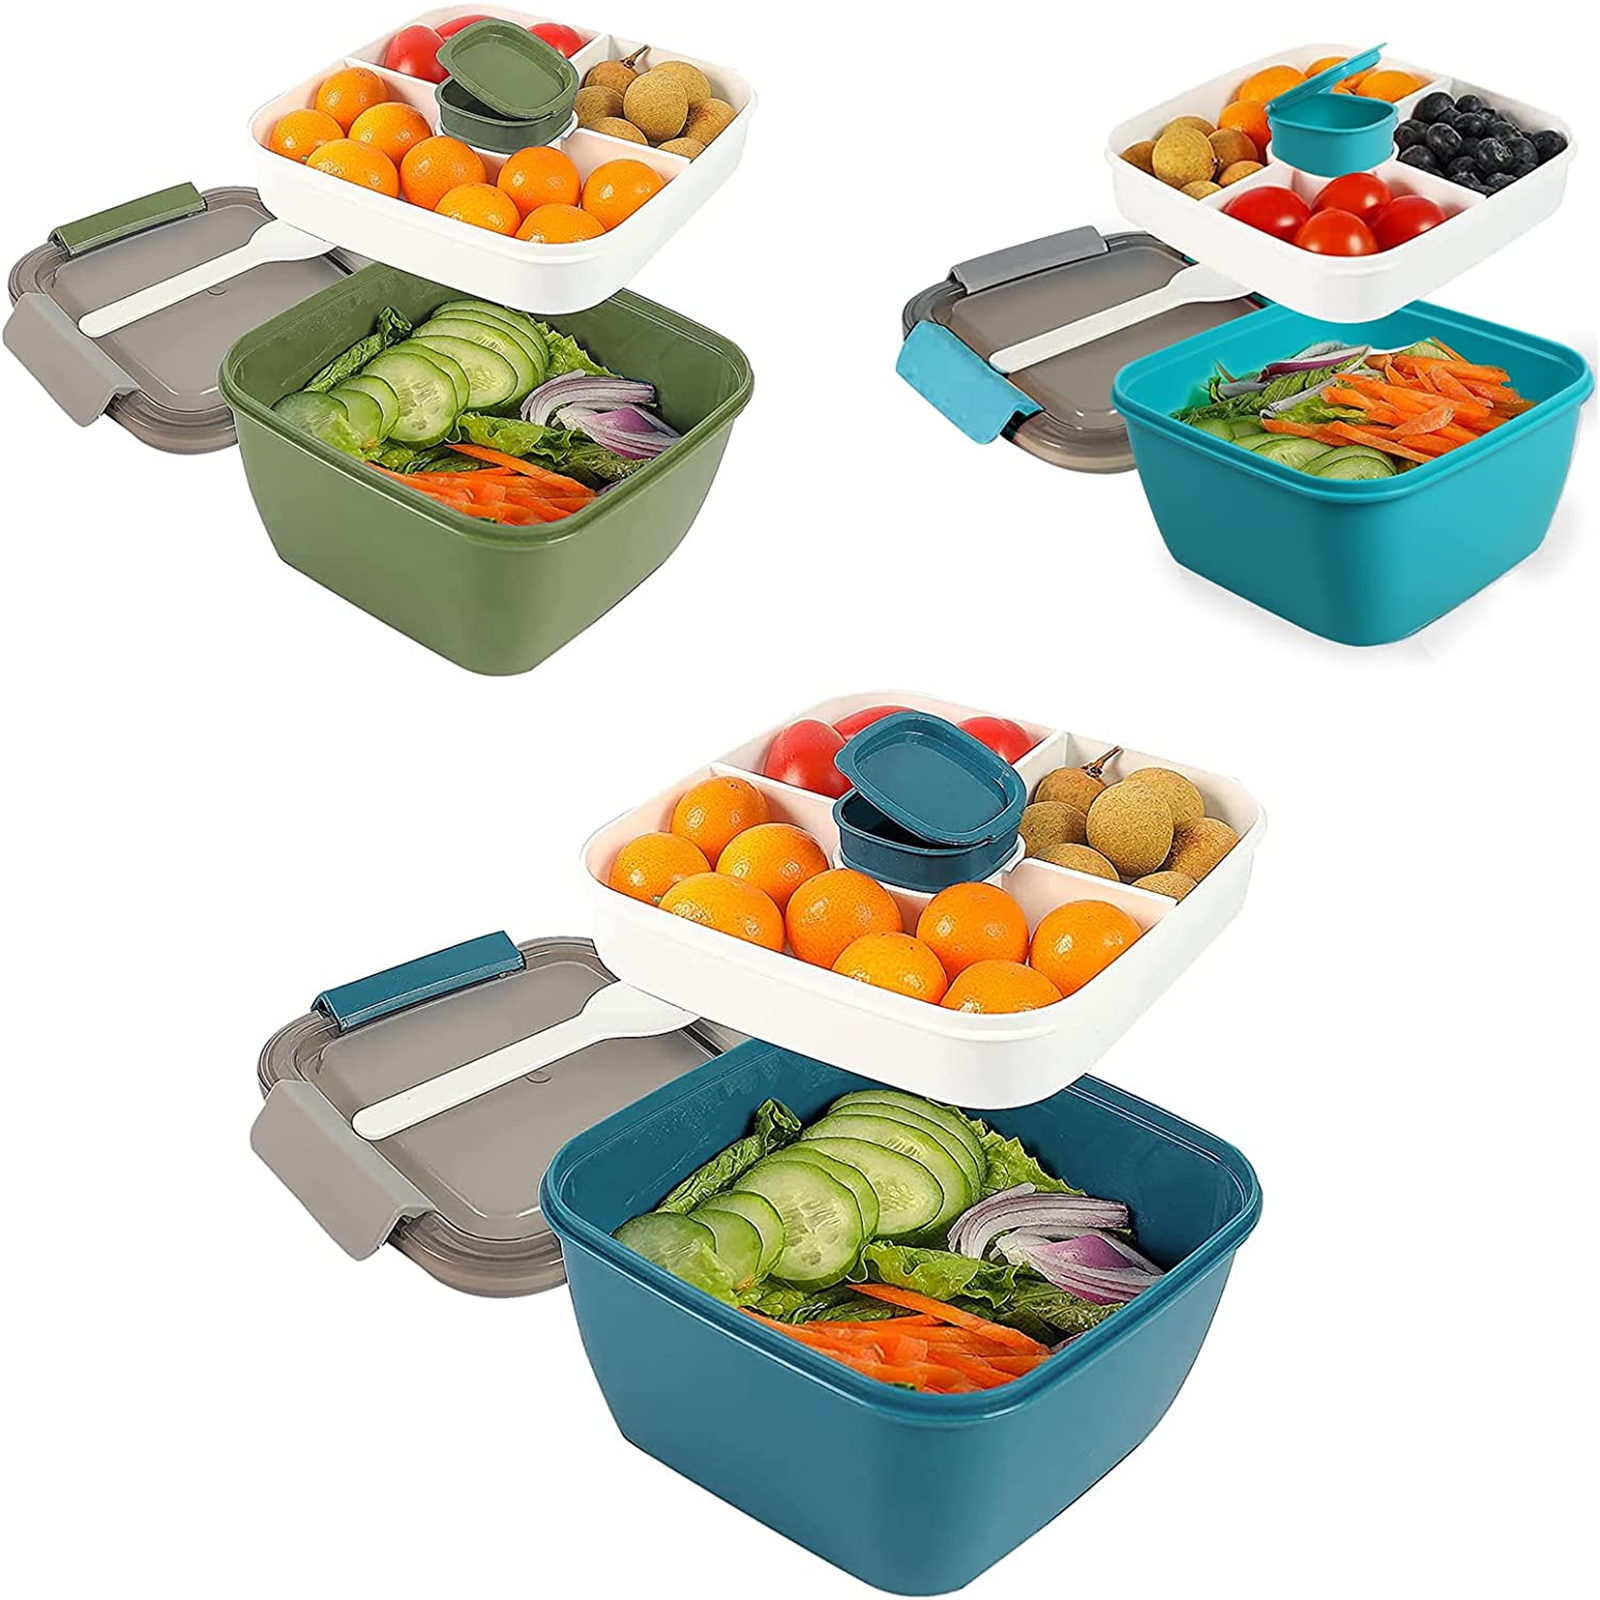 Large 52-oz. Salad Lunch Container, Salad Bowl with 3-Compartments